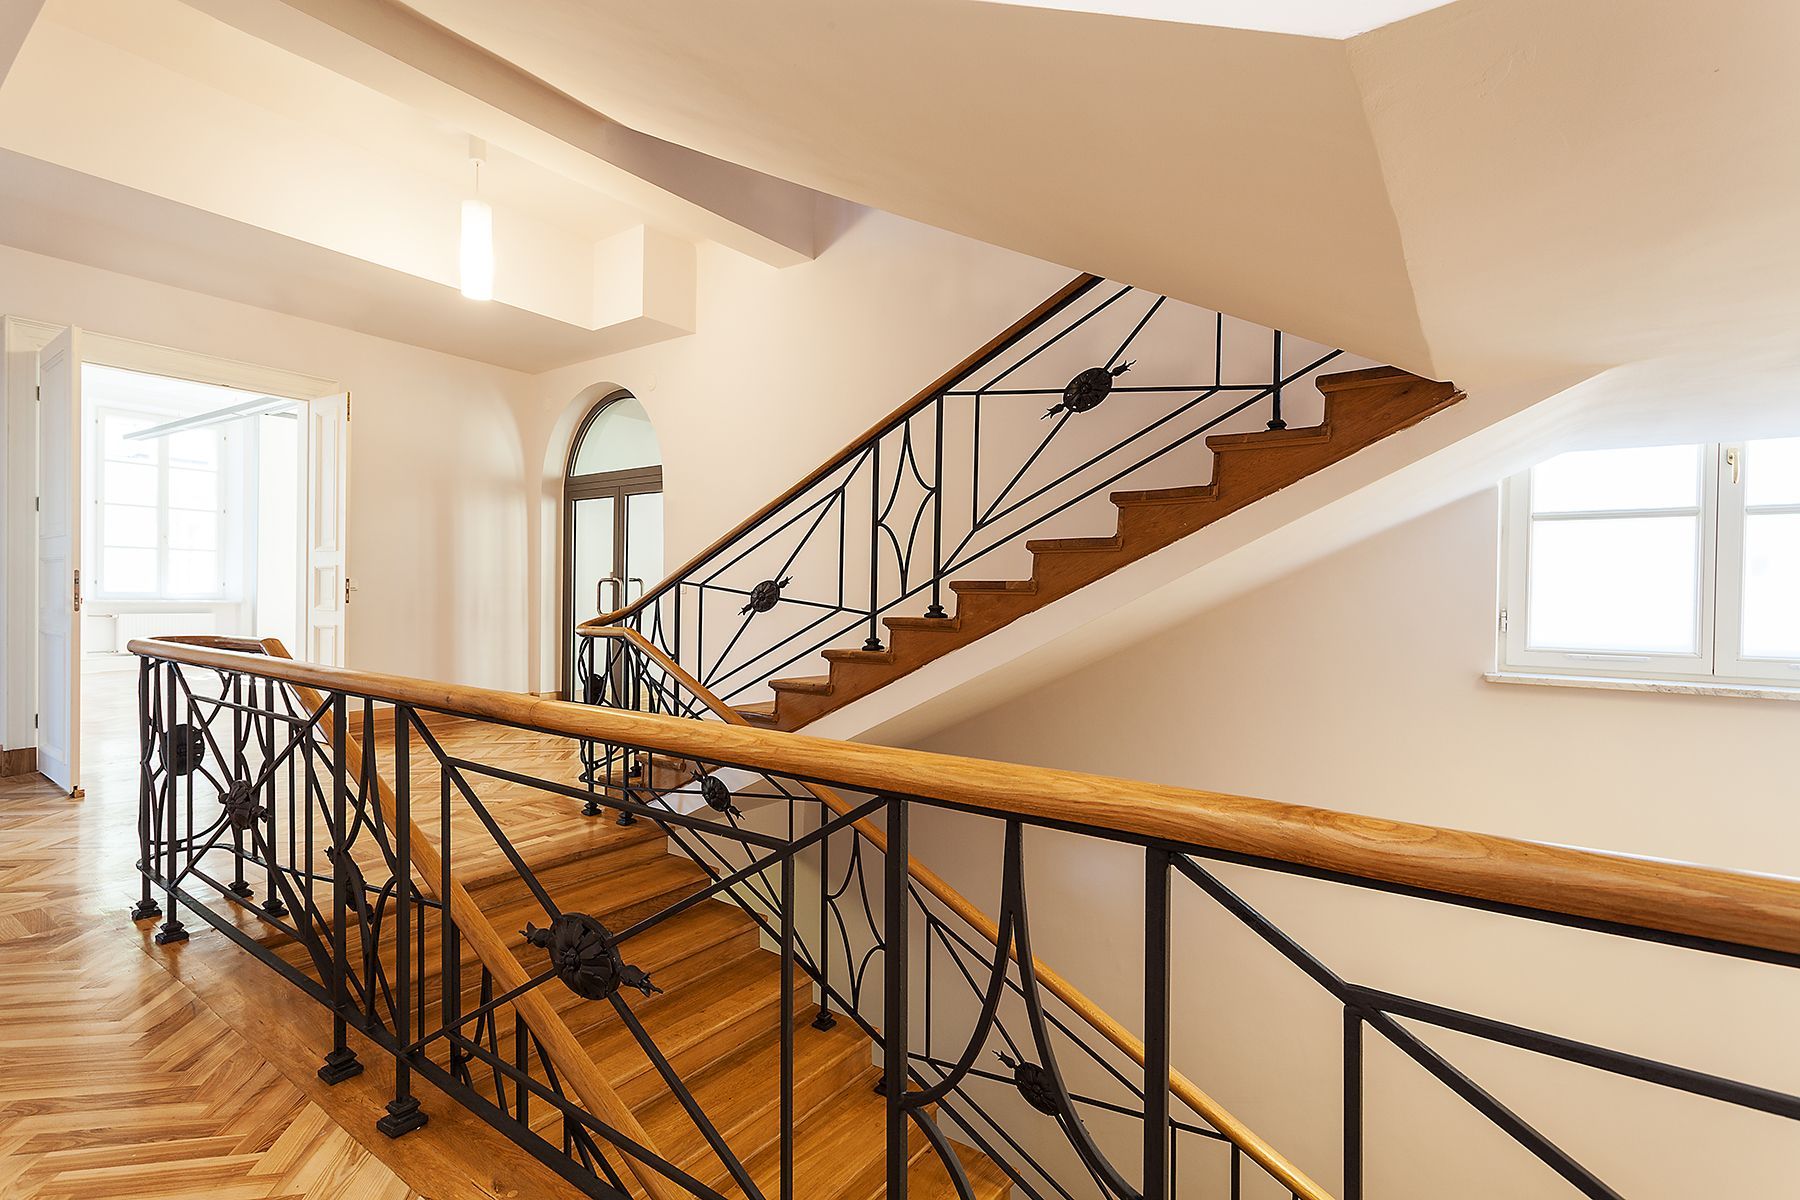 wrought iron and wood railing in large indoor staircase with custom design